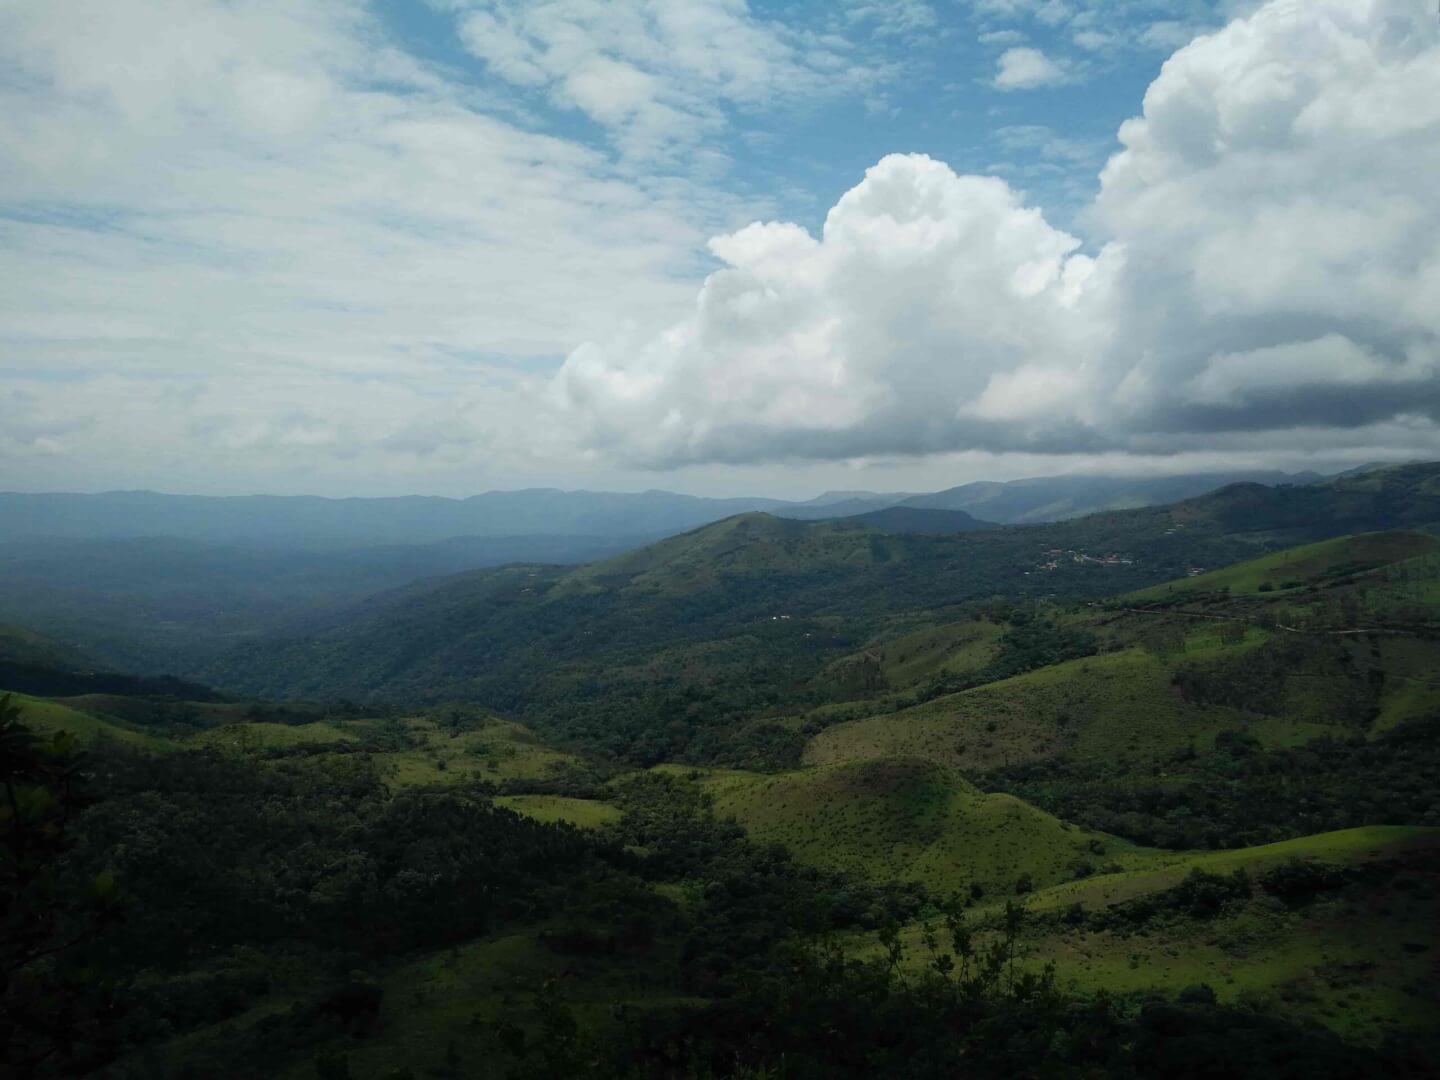 Chikmagalur: A quick travel guide to this beautiful place